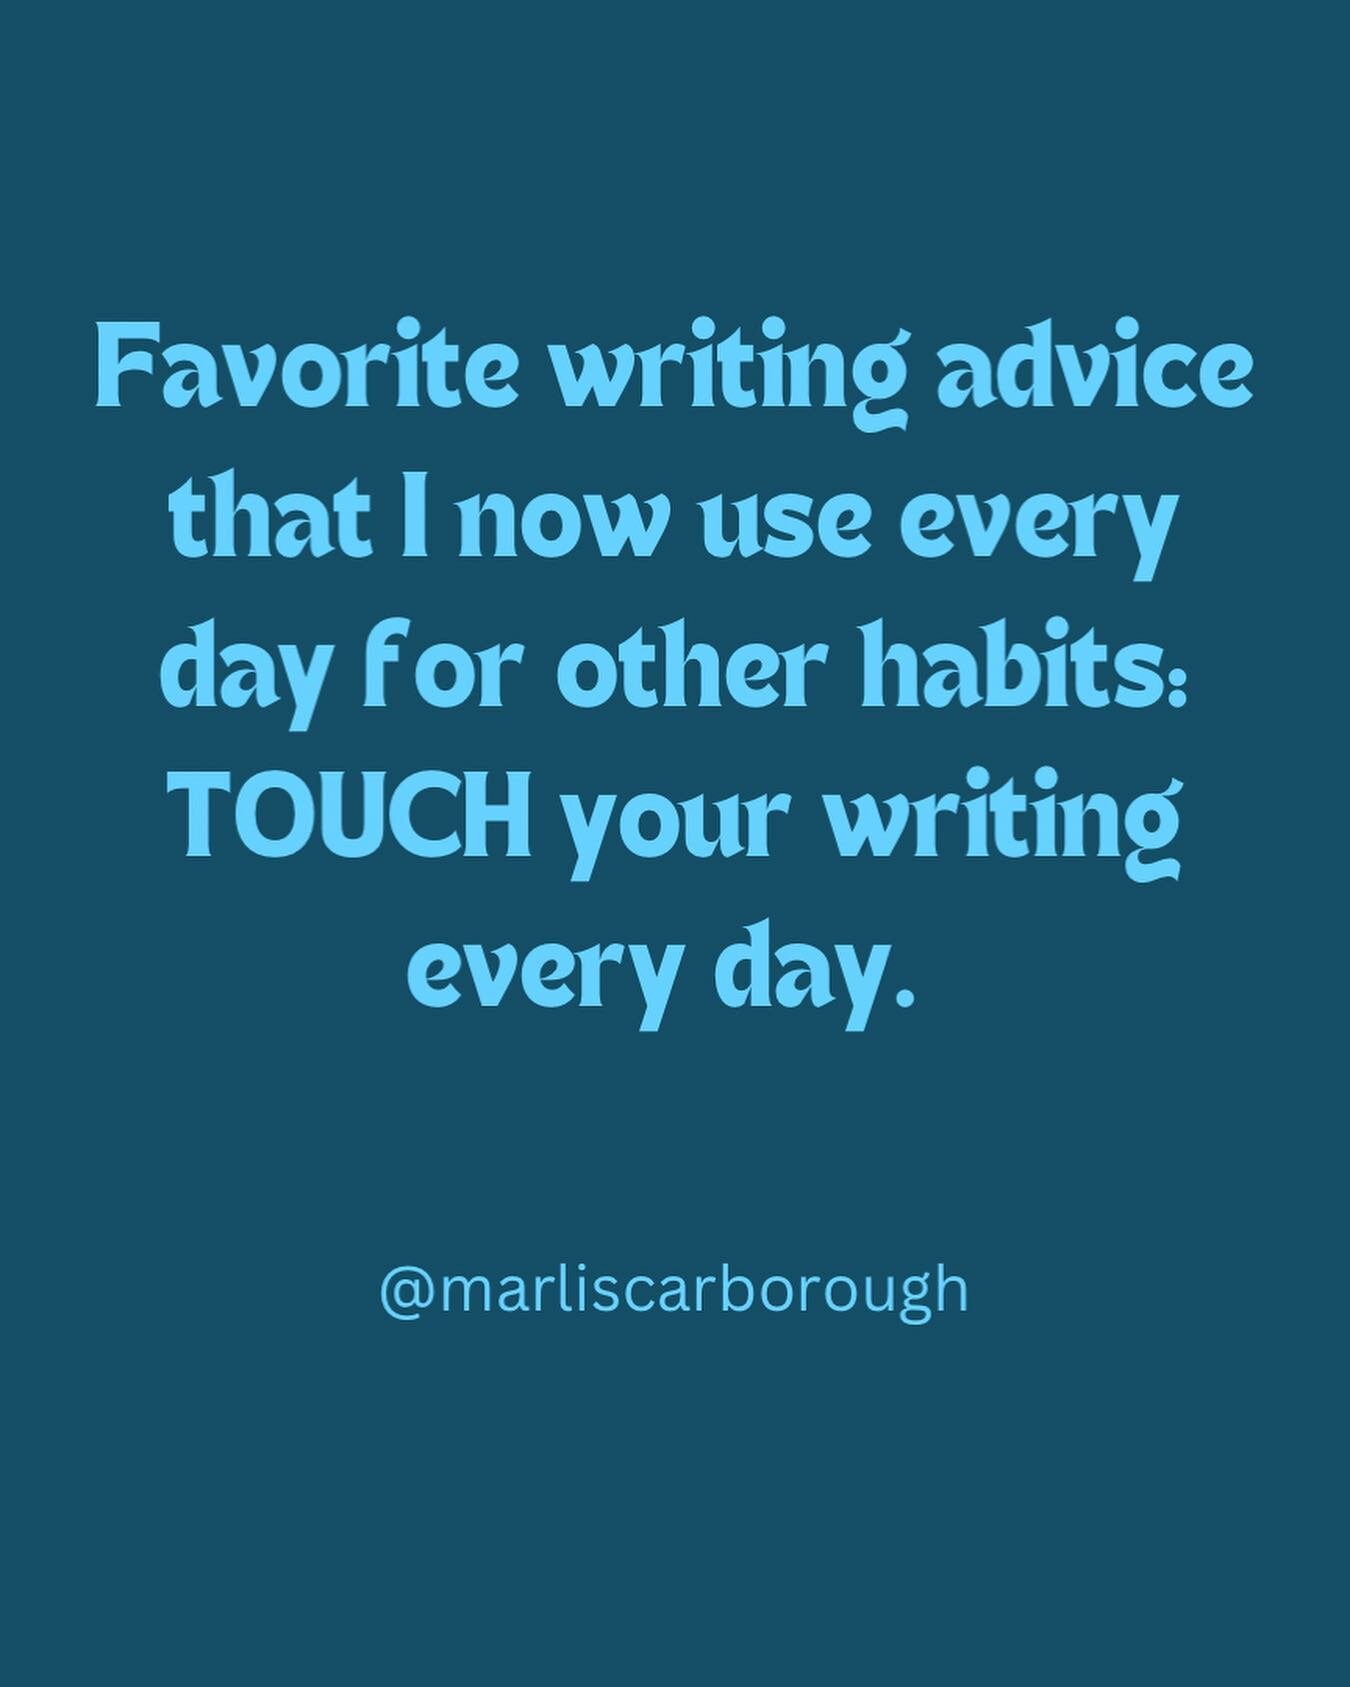 Favorite writing advice (that I now use every day for other habits): TOUCH your writing every day. 

Just open your computer and write a sentence. Just do something, no matter how small, and make sure you never skip a day. 

And now I use that practi